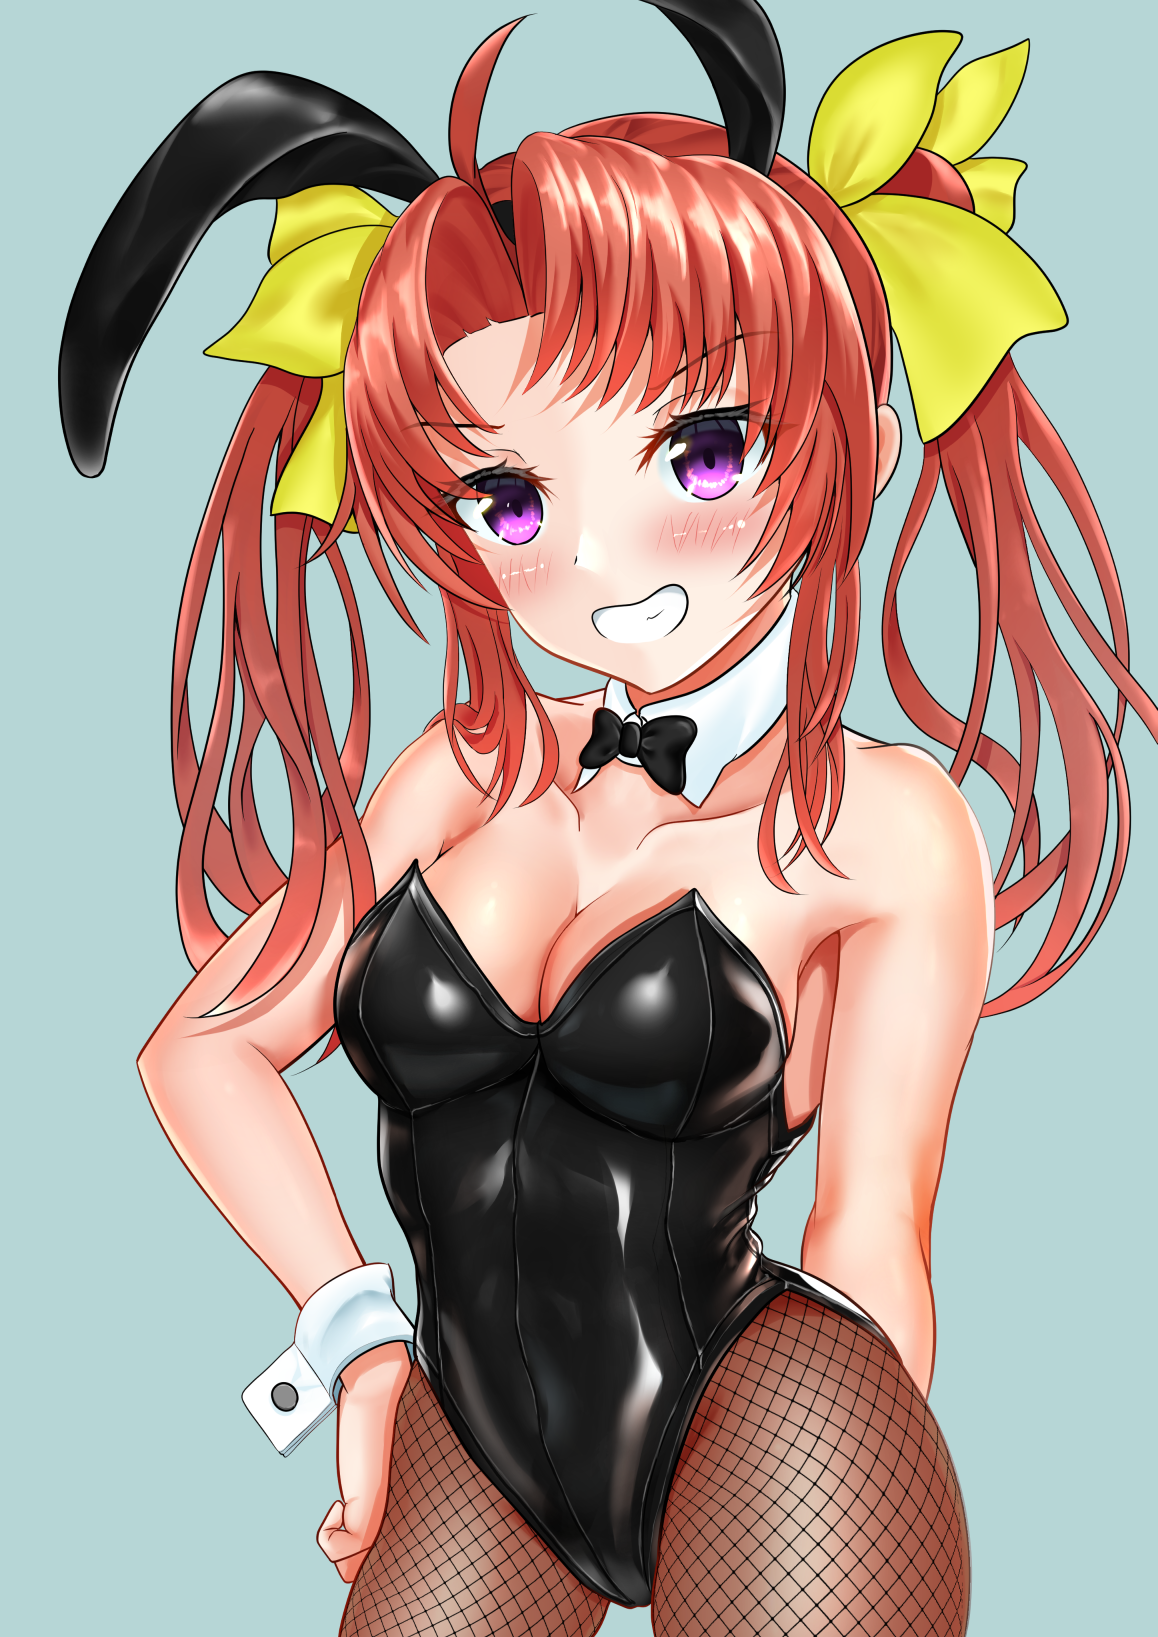 Anime 1158x1637 Kagerou (KanColle) Kantai Collection twintails brunette anime anime girls artwork digital art fan art bunny suit fishnet cleavage bunny ears